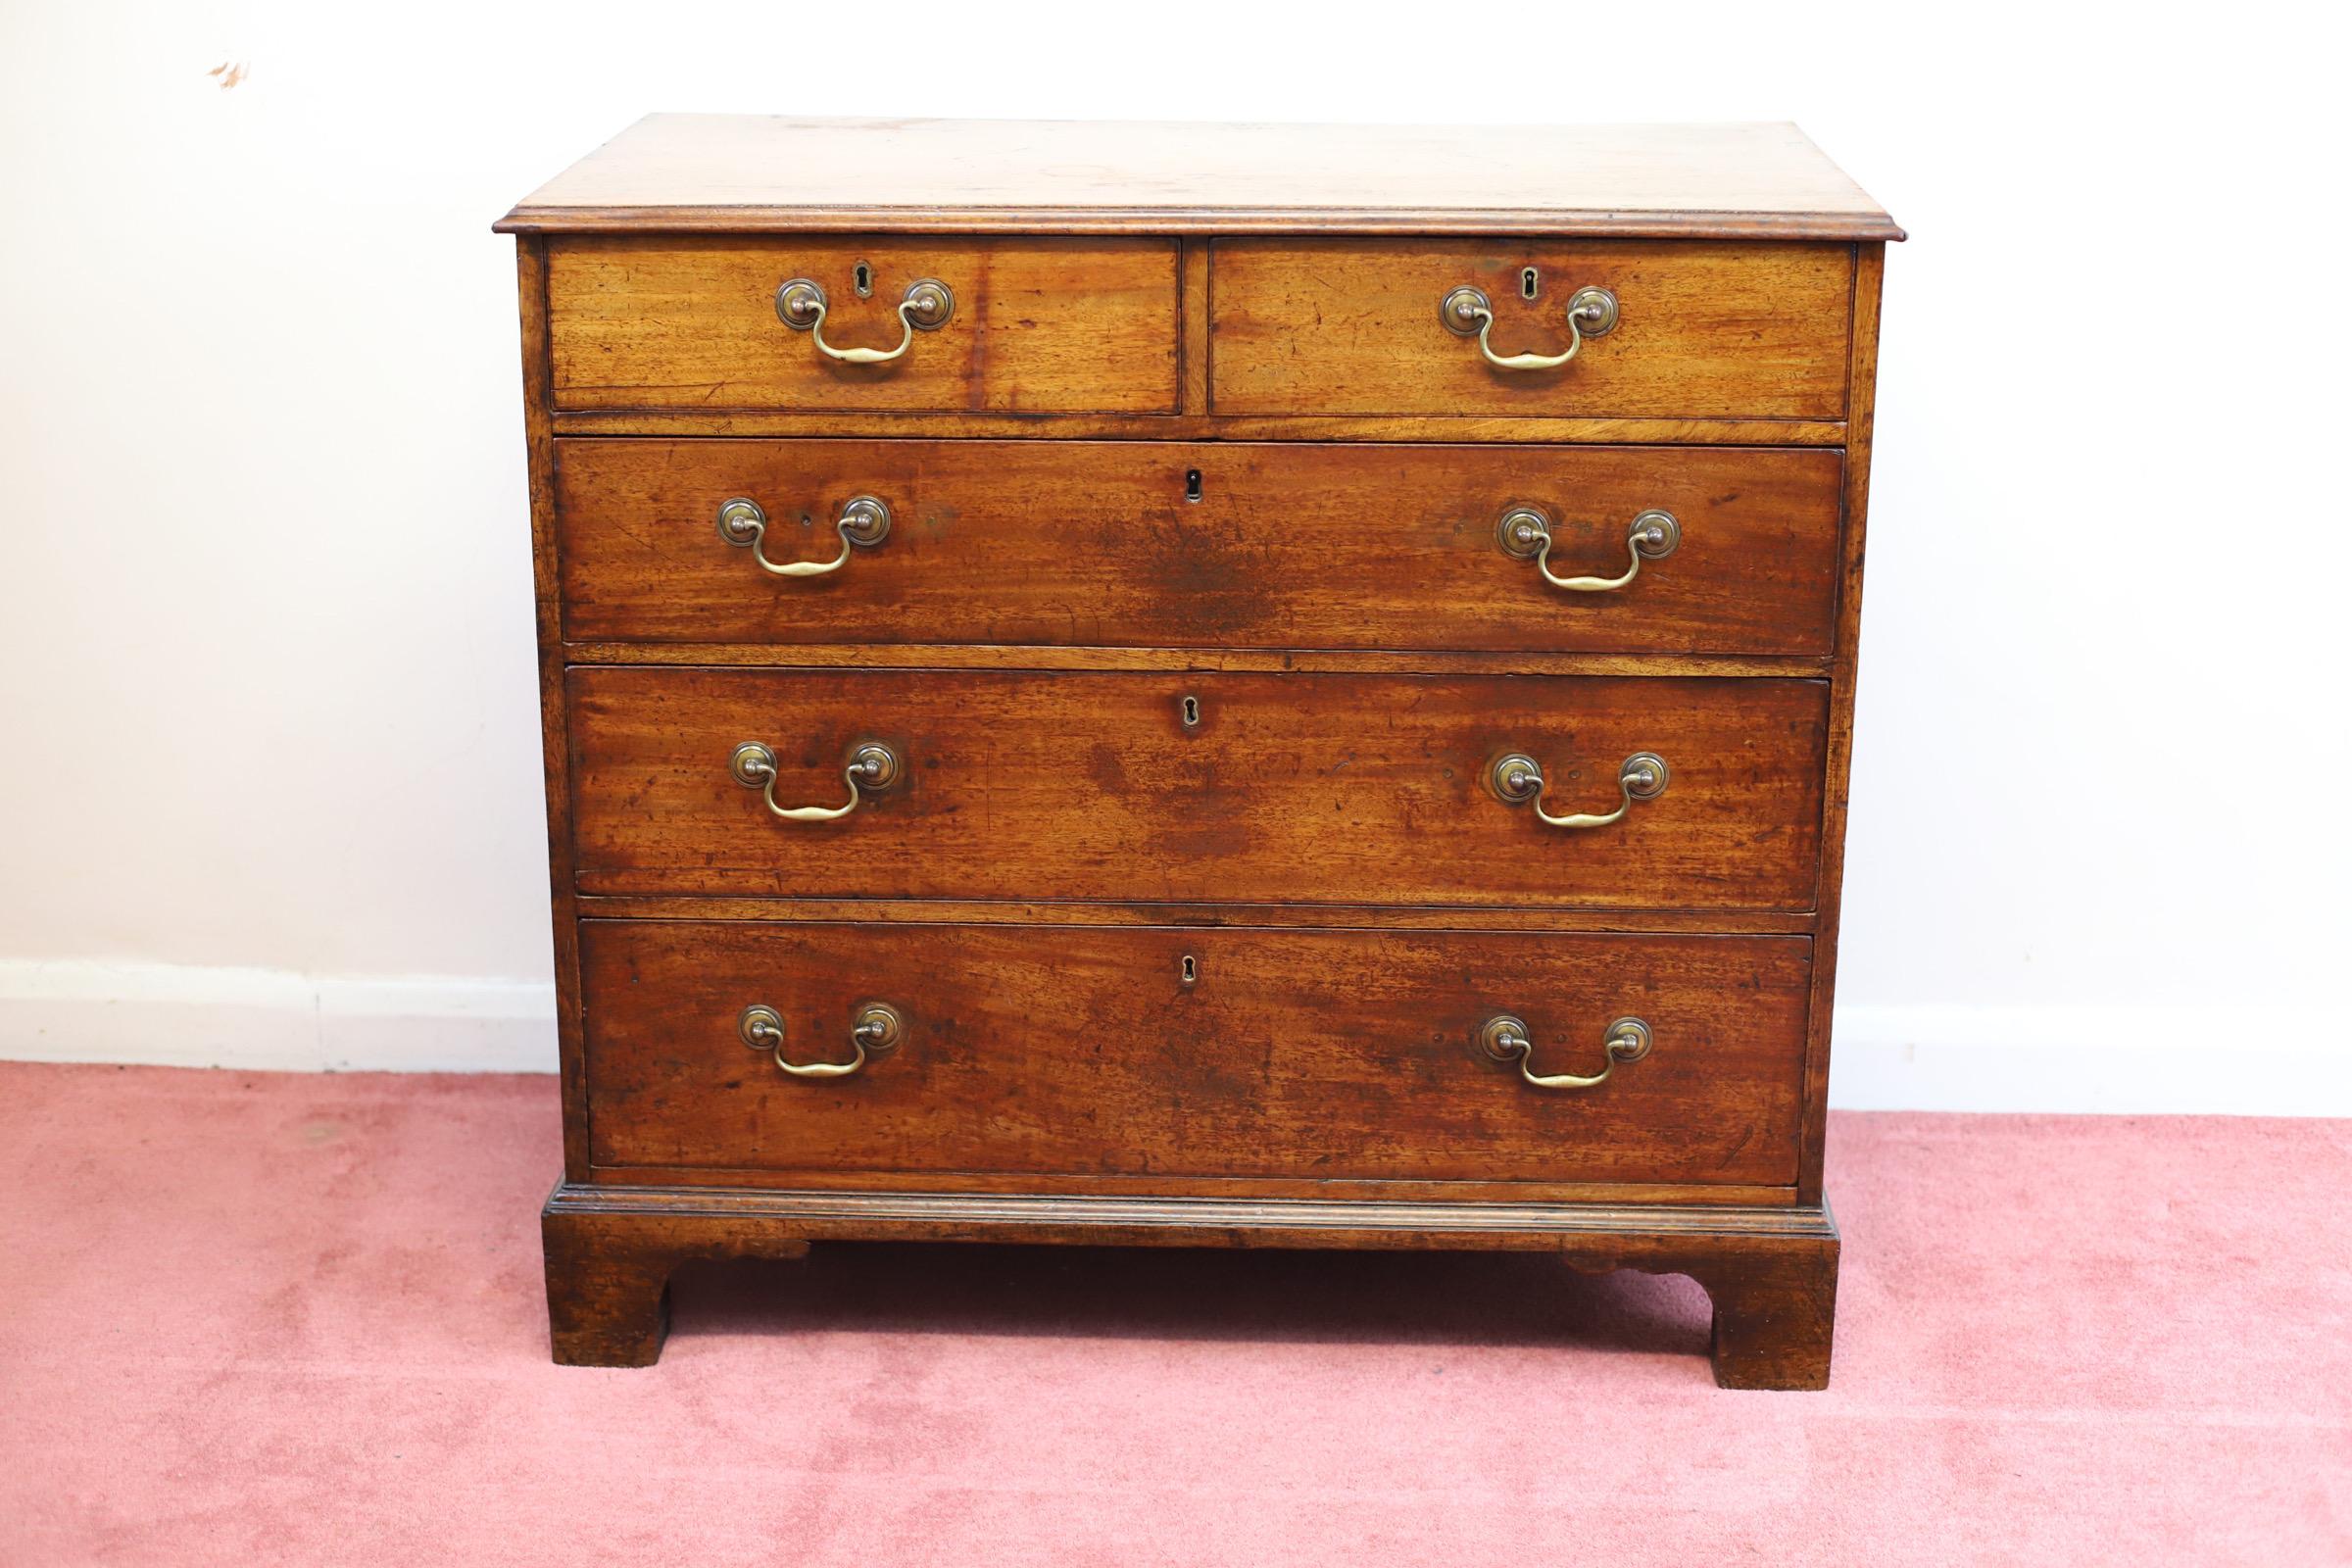 Beautiful antique 18th century chest of five drawers , made by two short and three long drawers with brass swan handles standing on shapped bracket feet .Amazing colour , patina and in original condition .
Circa 1800.

Don't hesitate to contact me